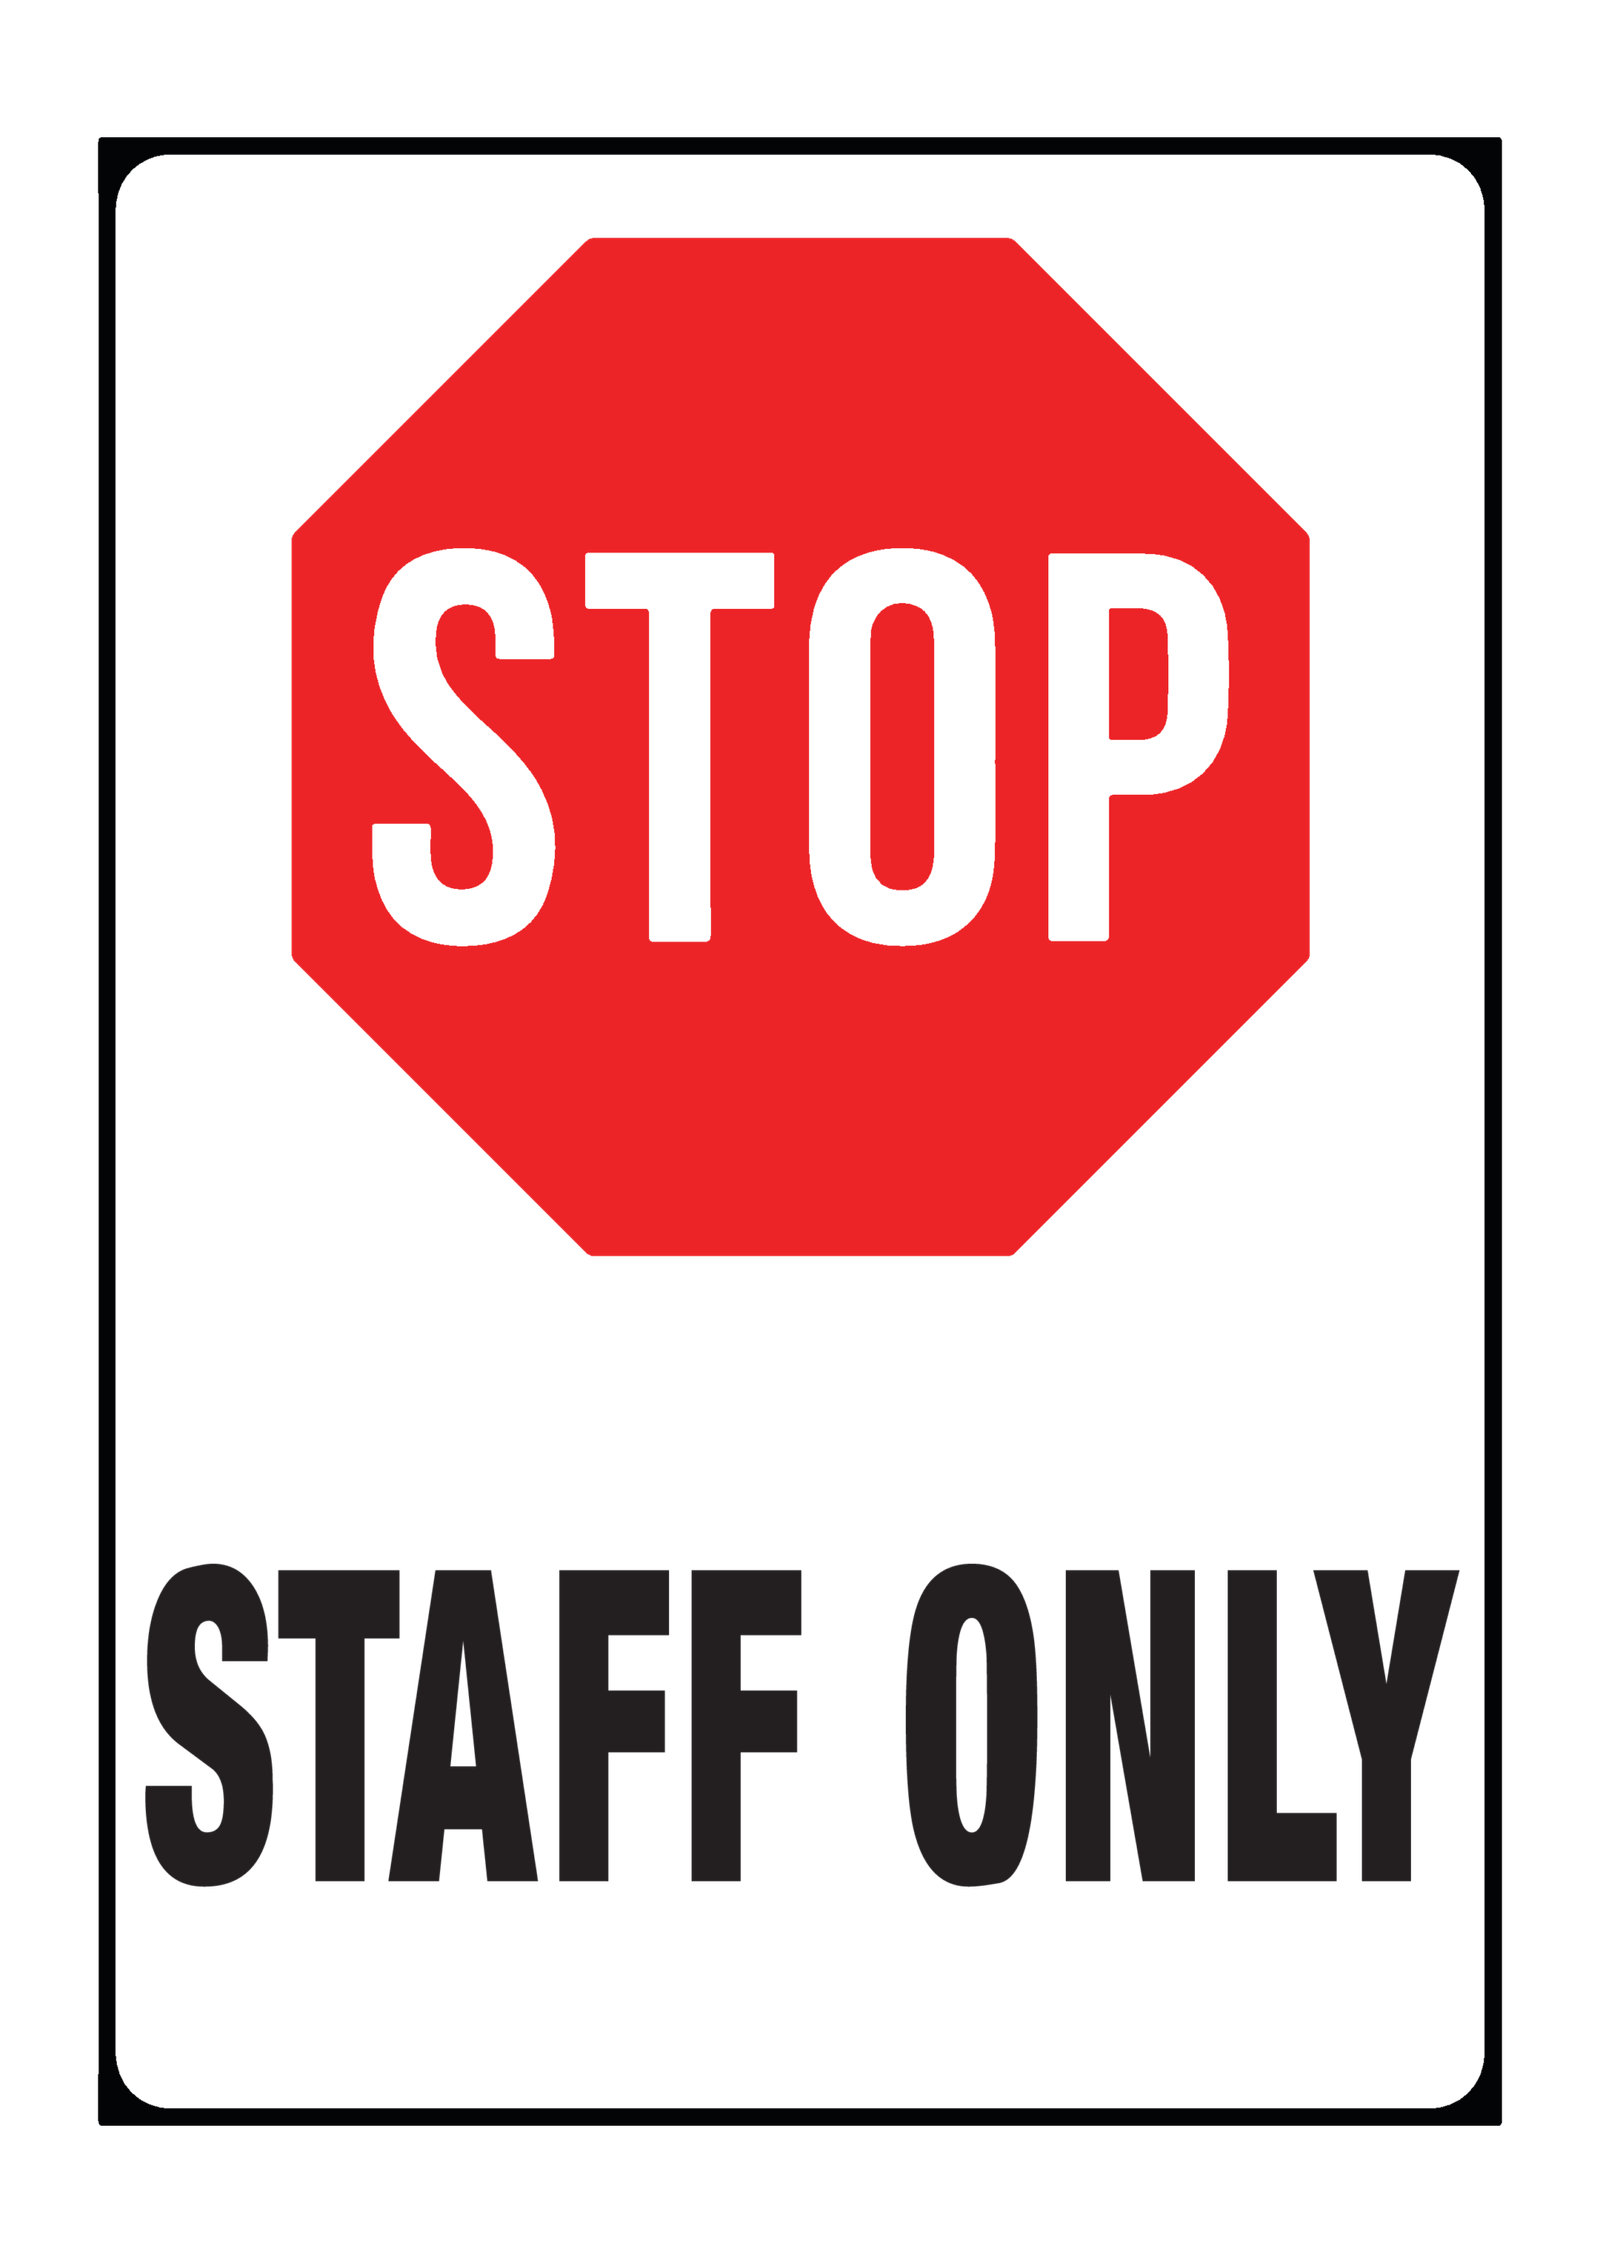 staff-only-stop-sign-free-download-free-printable-signs